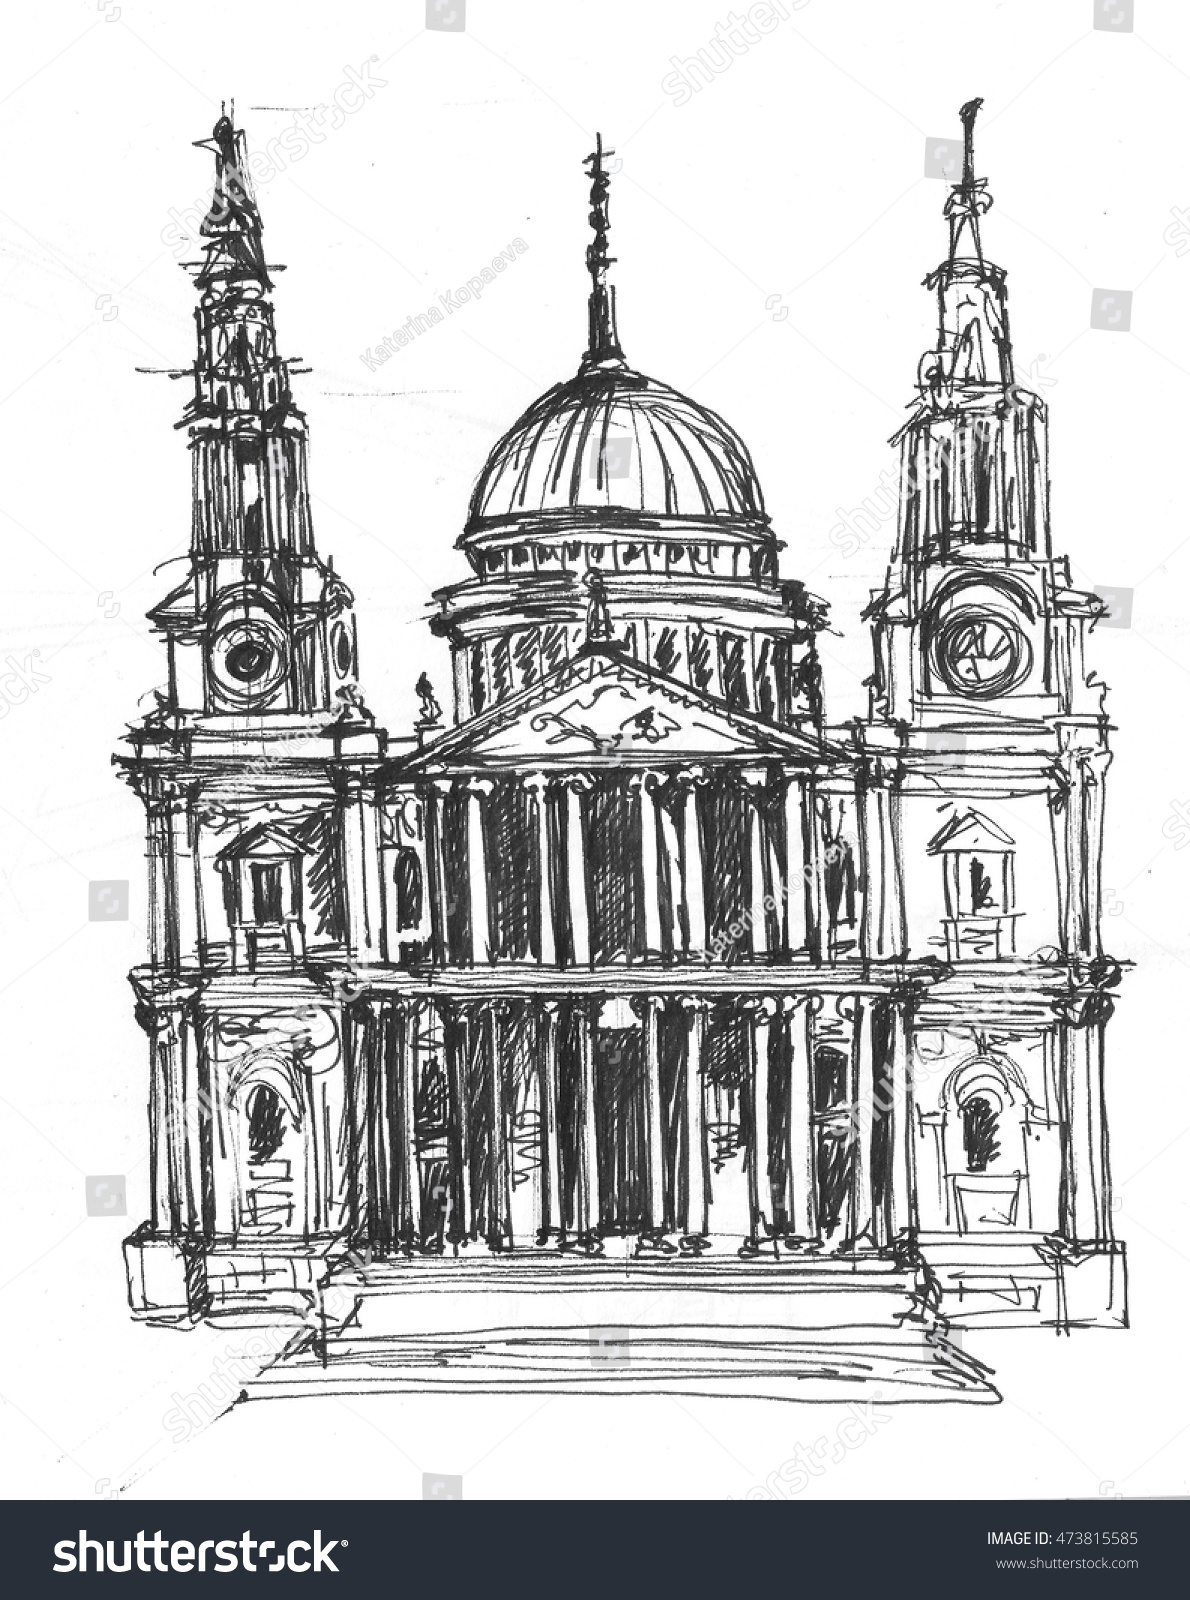 St. Paul'S Cathedral London Sketch Stock Photo 473815585 : Shutterstock